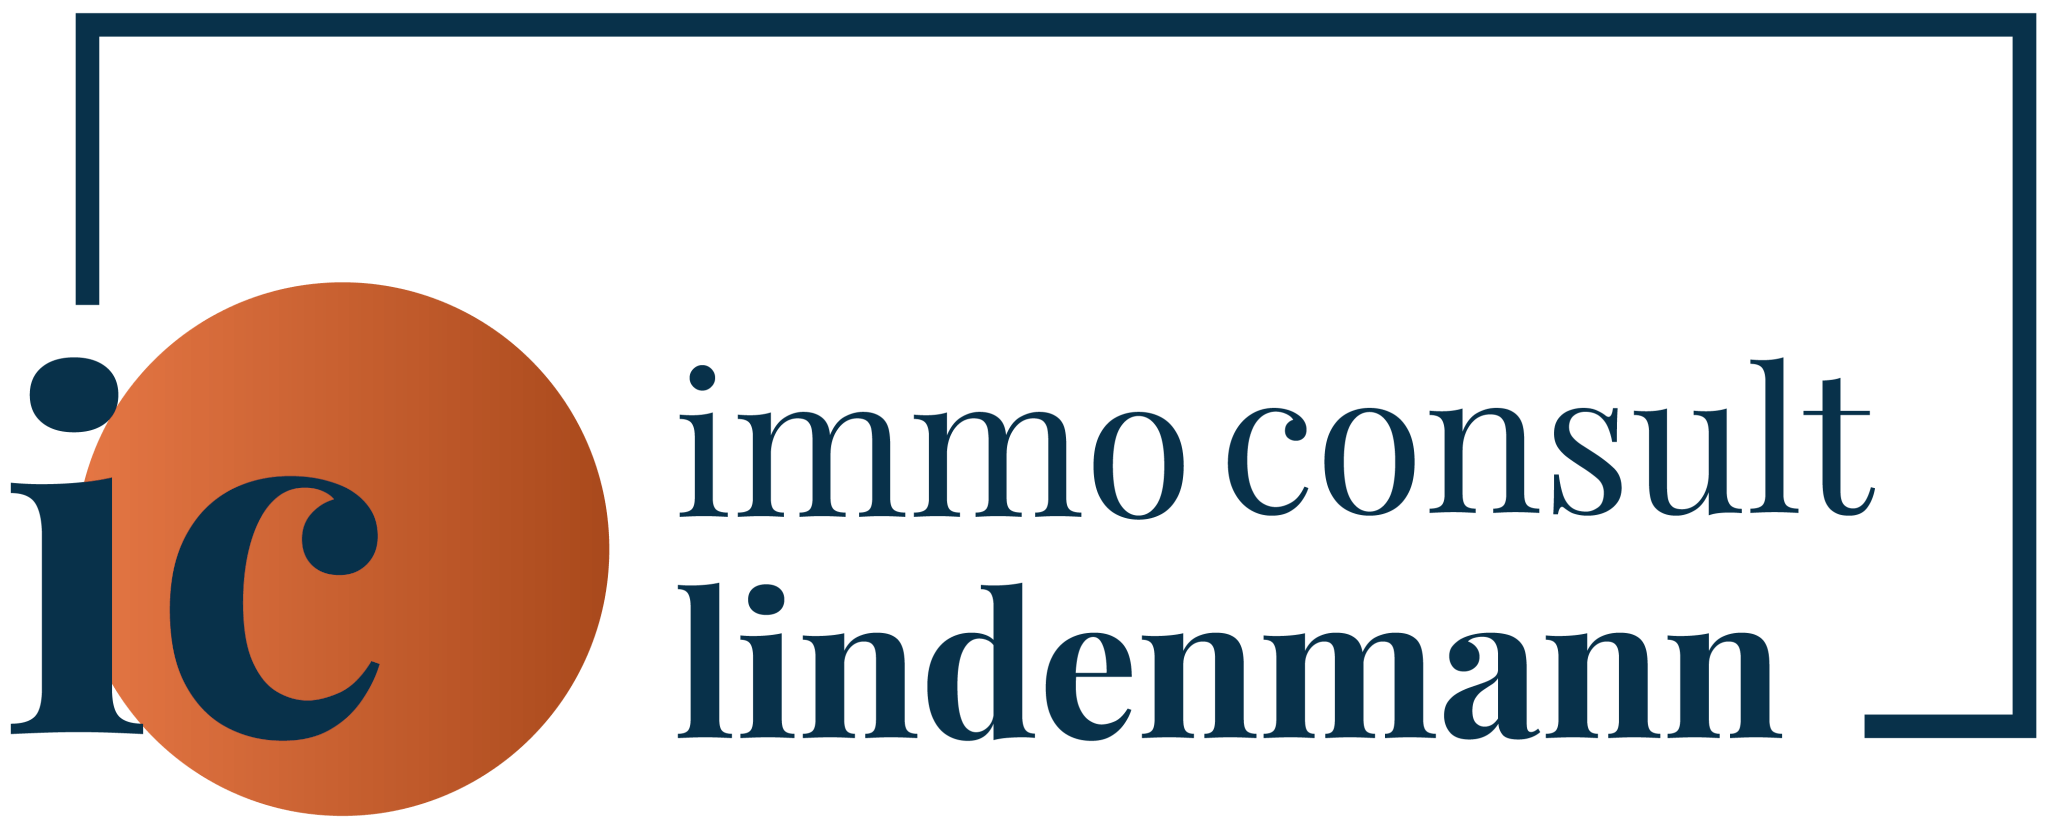 immo consult lindenmann GmbH